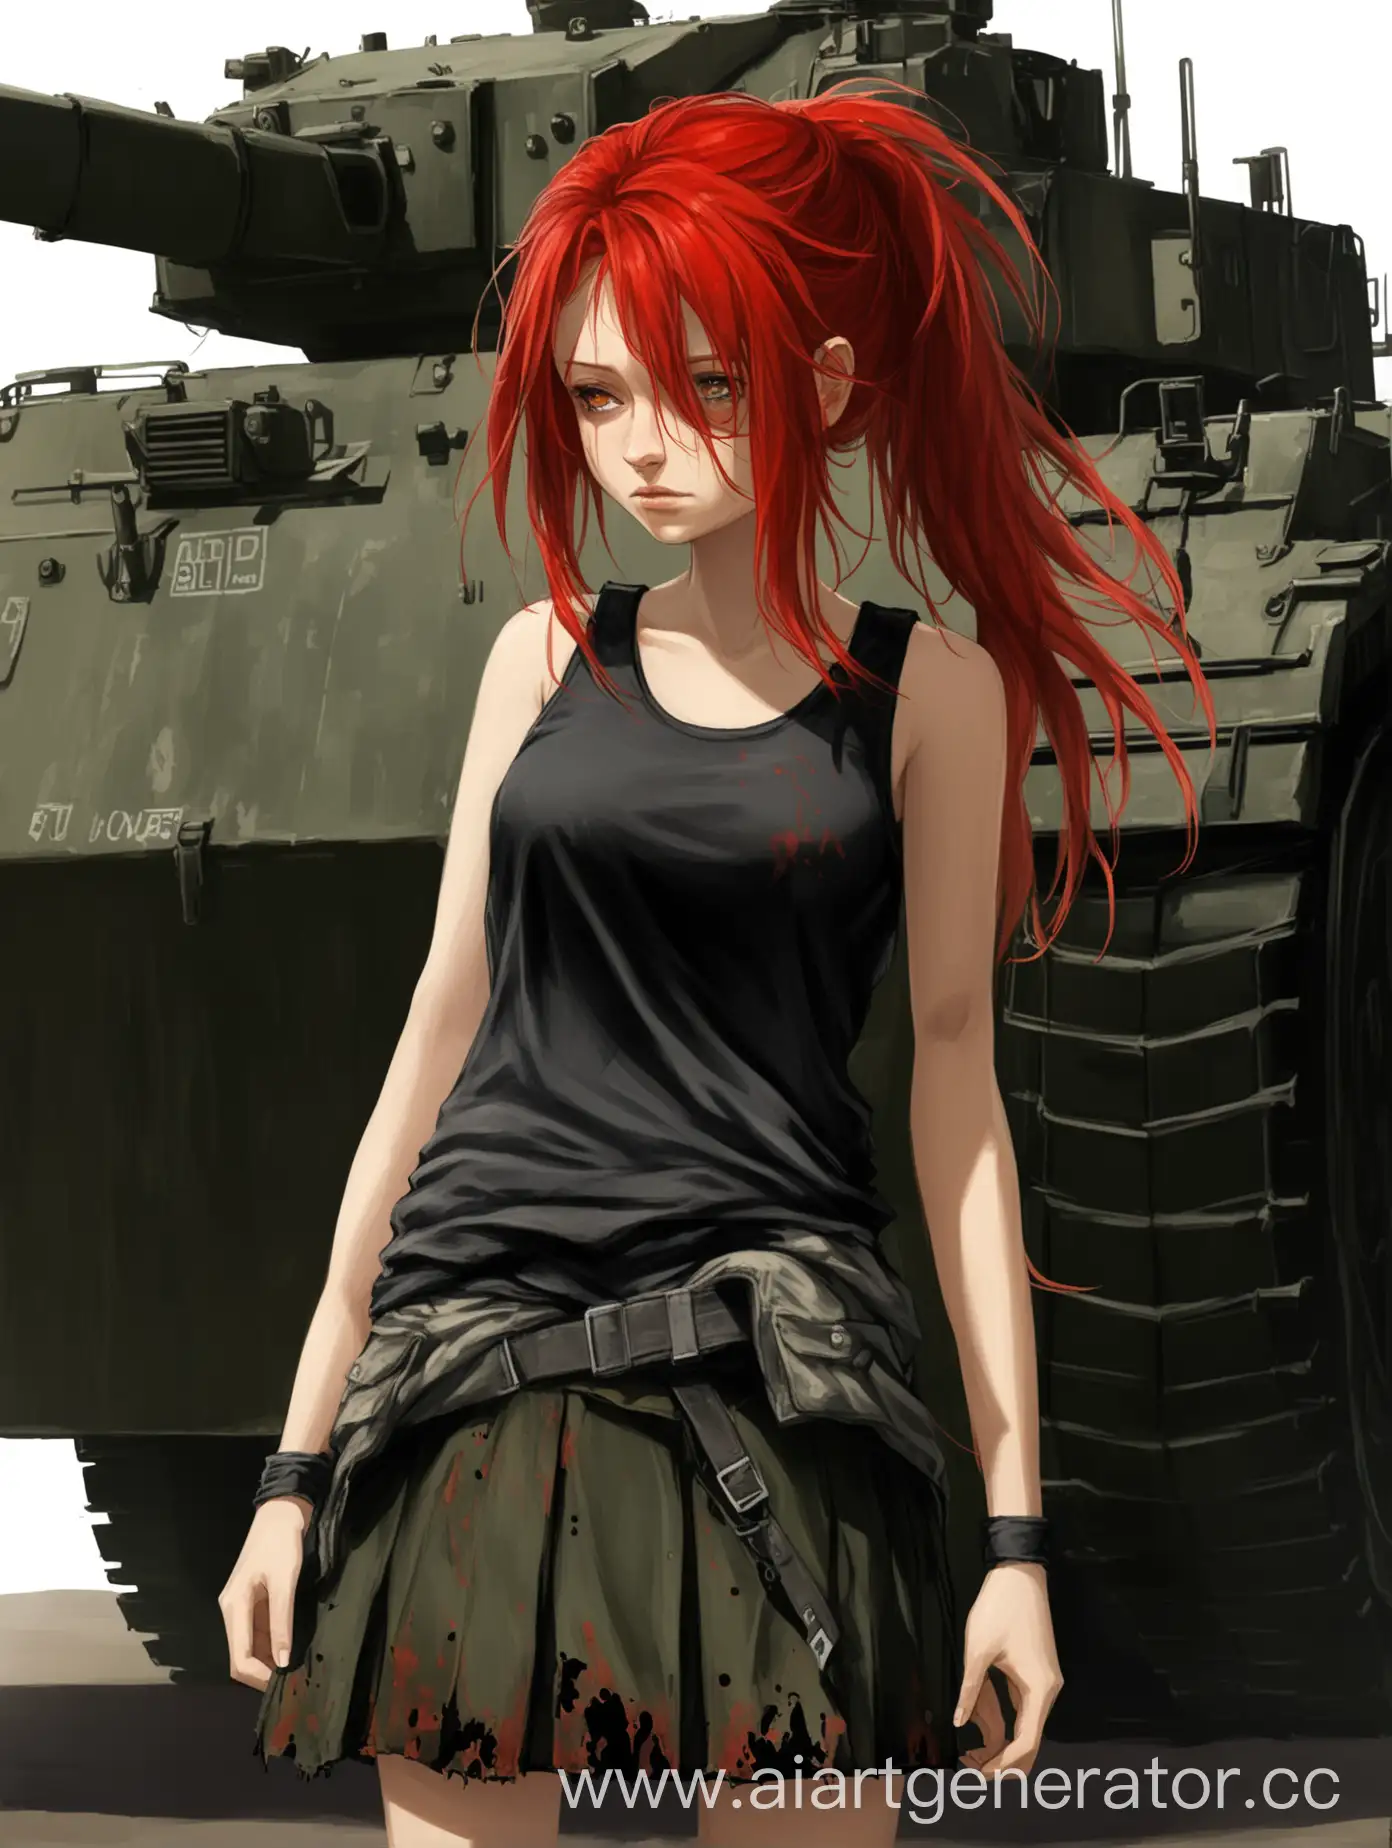 RedHaired-Girl-in-Edgy-Cargo-Tank-Top-and-Skirt